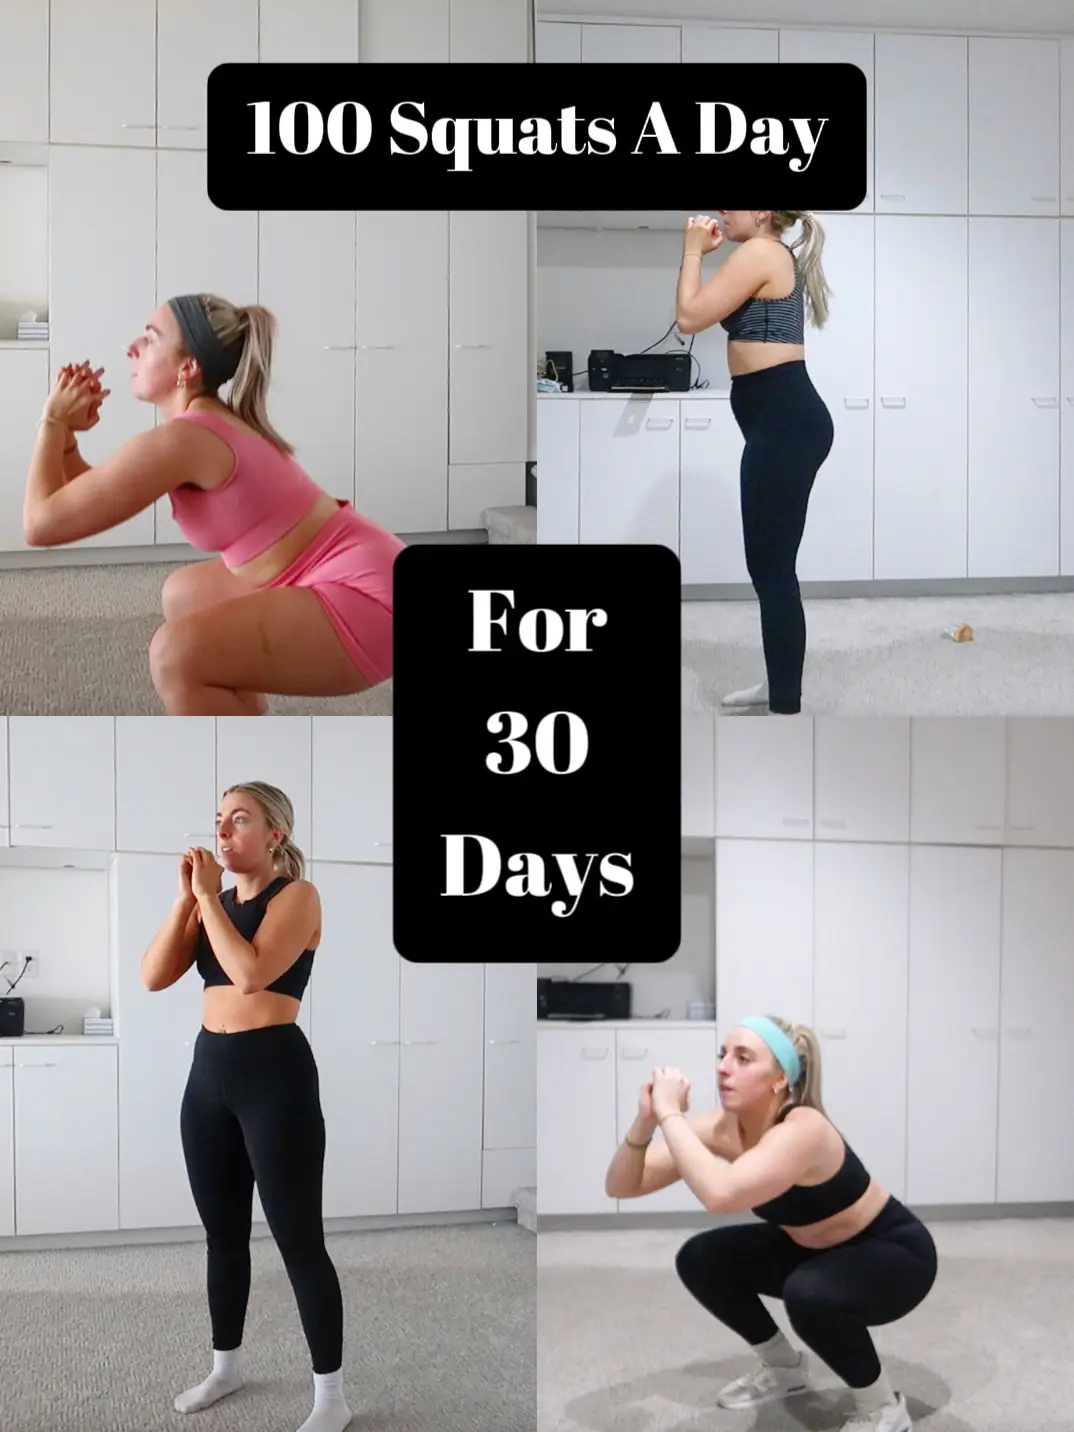 How Many Squats Should I Do in a Day to See Results?